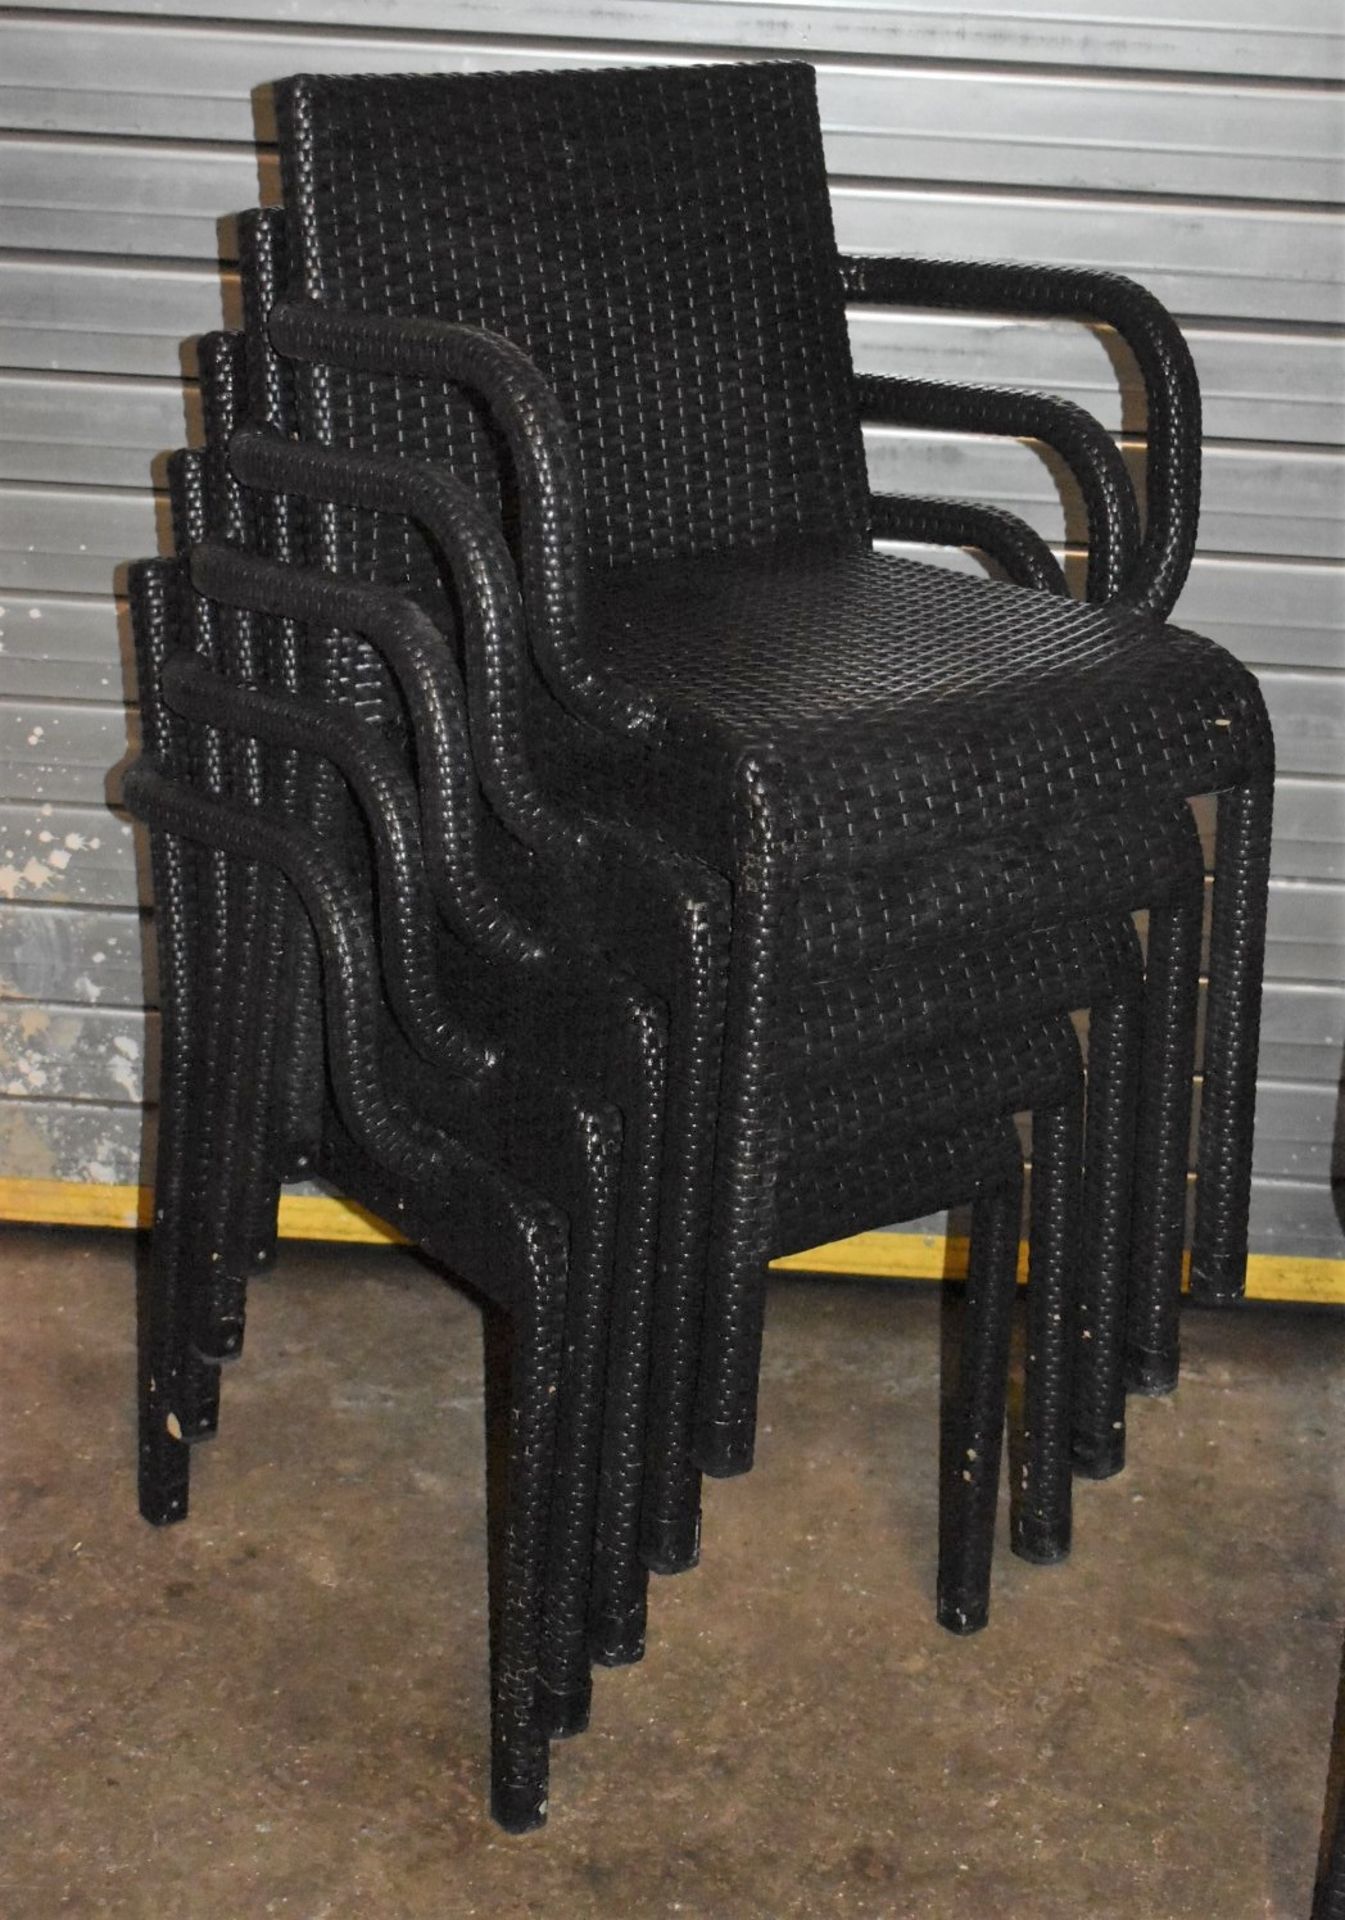 6 x Outdoor Stackable Rattan Chairs With Arm Rests - CL999 - Ref WH5 - Provided in Very Good - Image 6 of 9